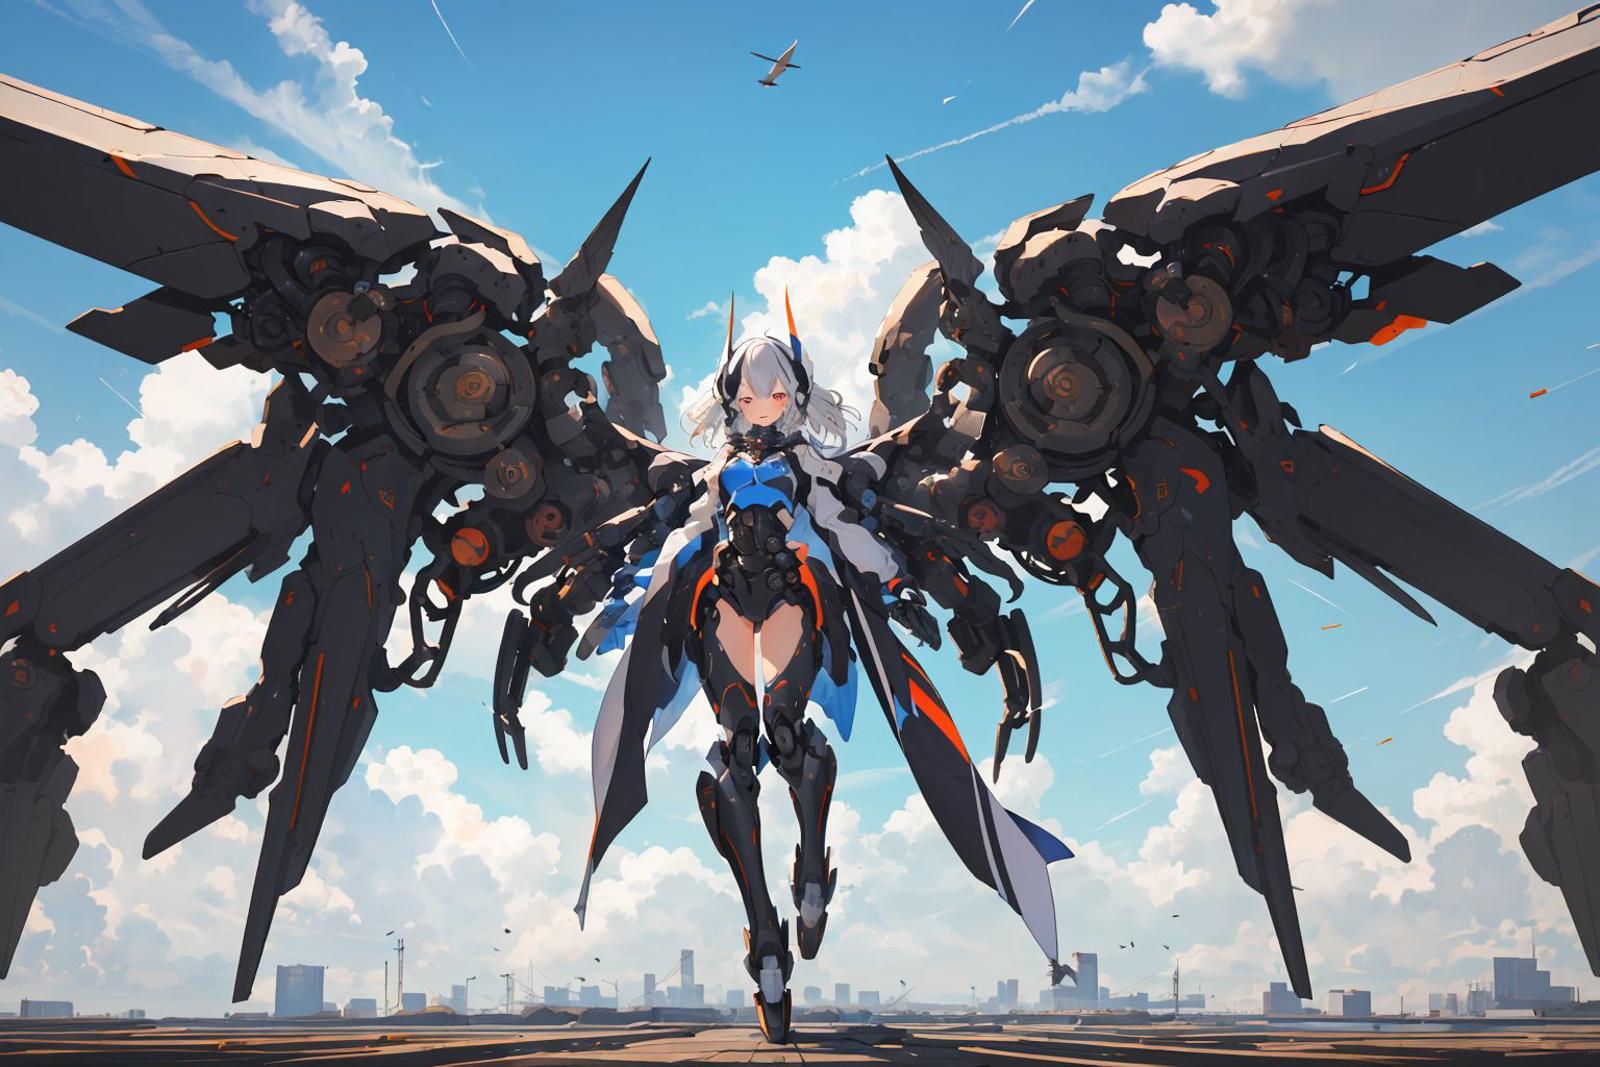 LottaLewds' mechanical_wings image by ChaosOrchestrator